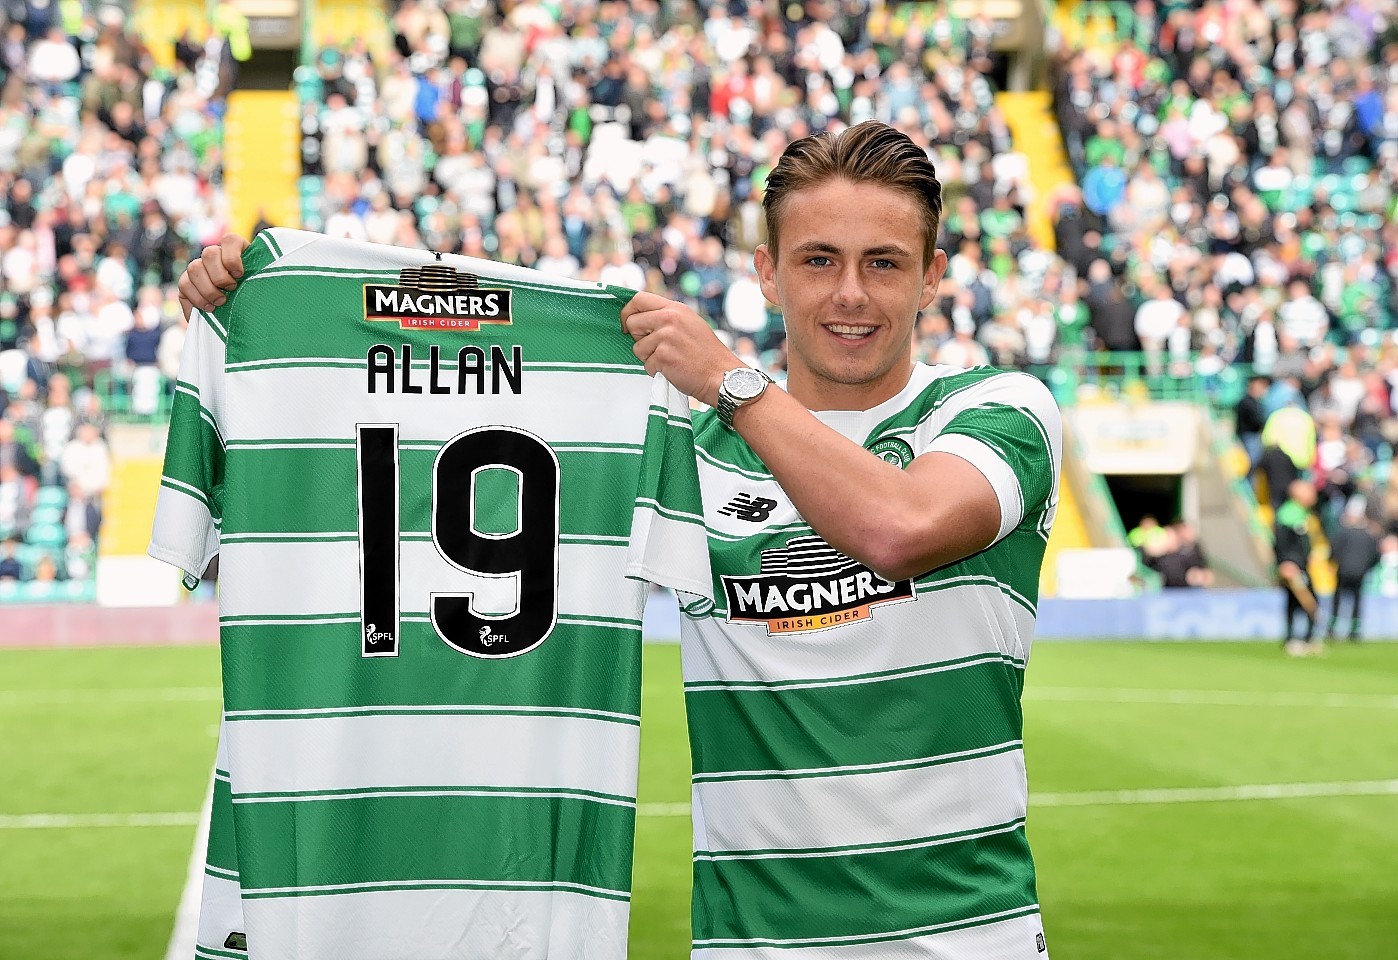 New Celtic signing Scott Allan is all smiles after being unveiled to the home support ahead of kick-off.